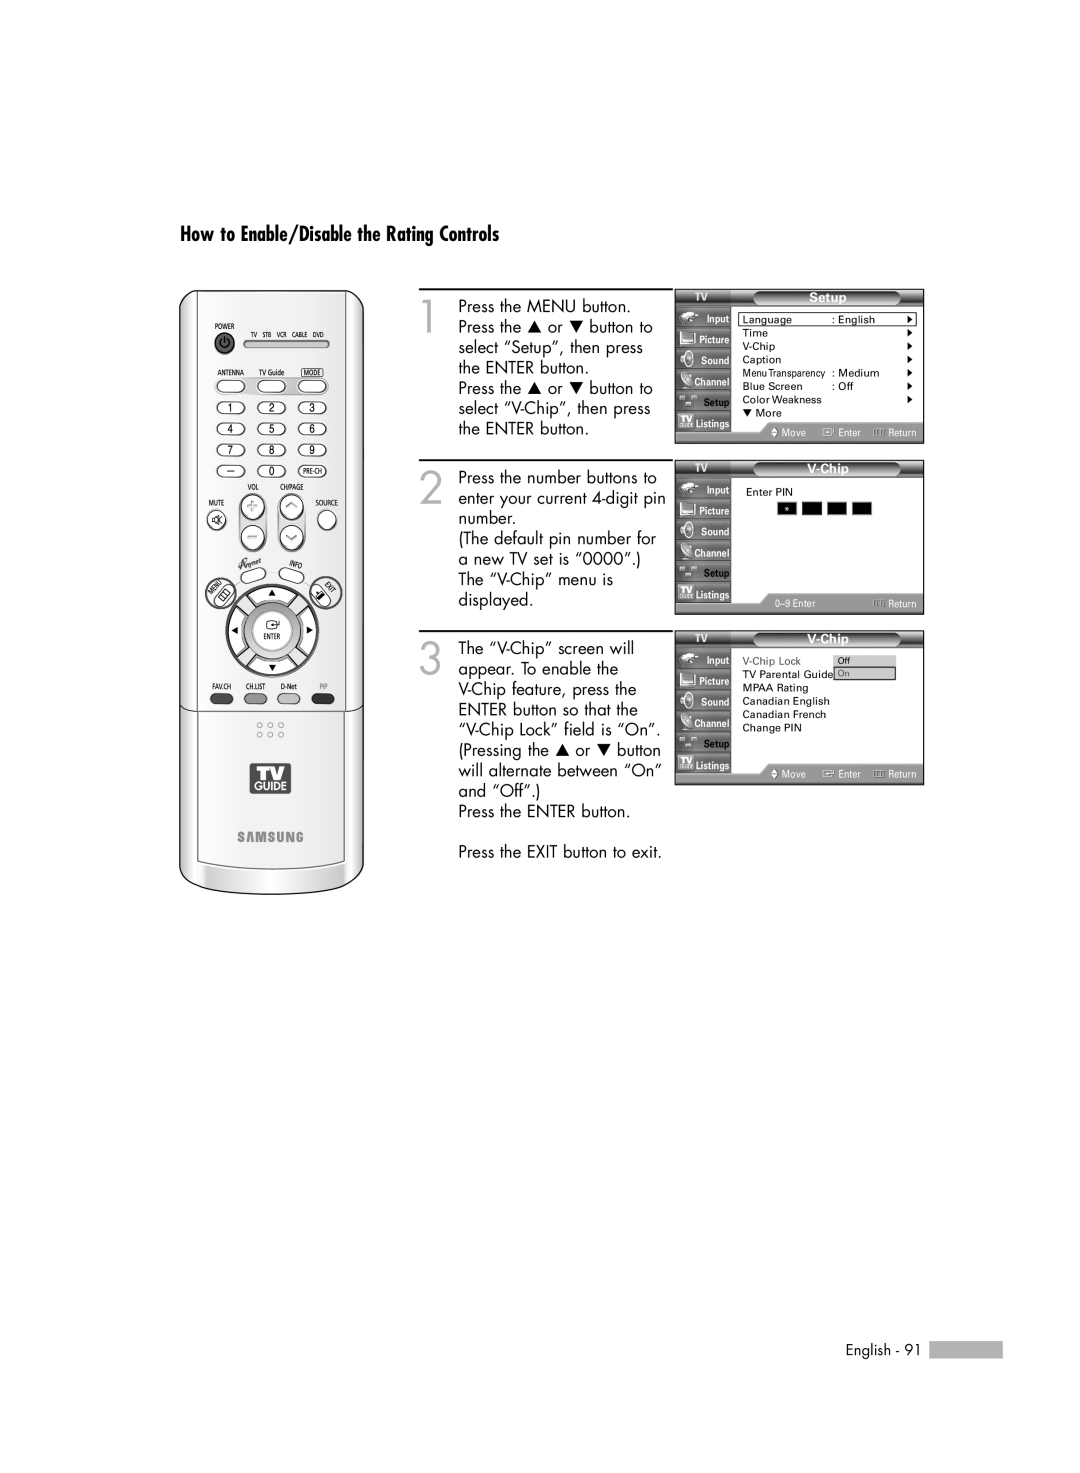 Samsung HL-R5678W, HL-R6178W, HL-R7178W manual How to Enable/Disable the Rating Controls 